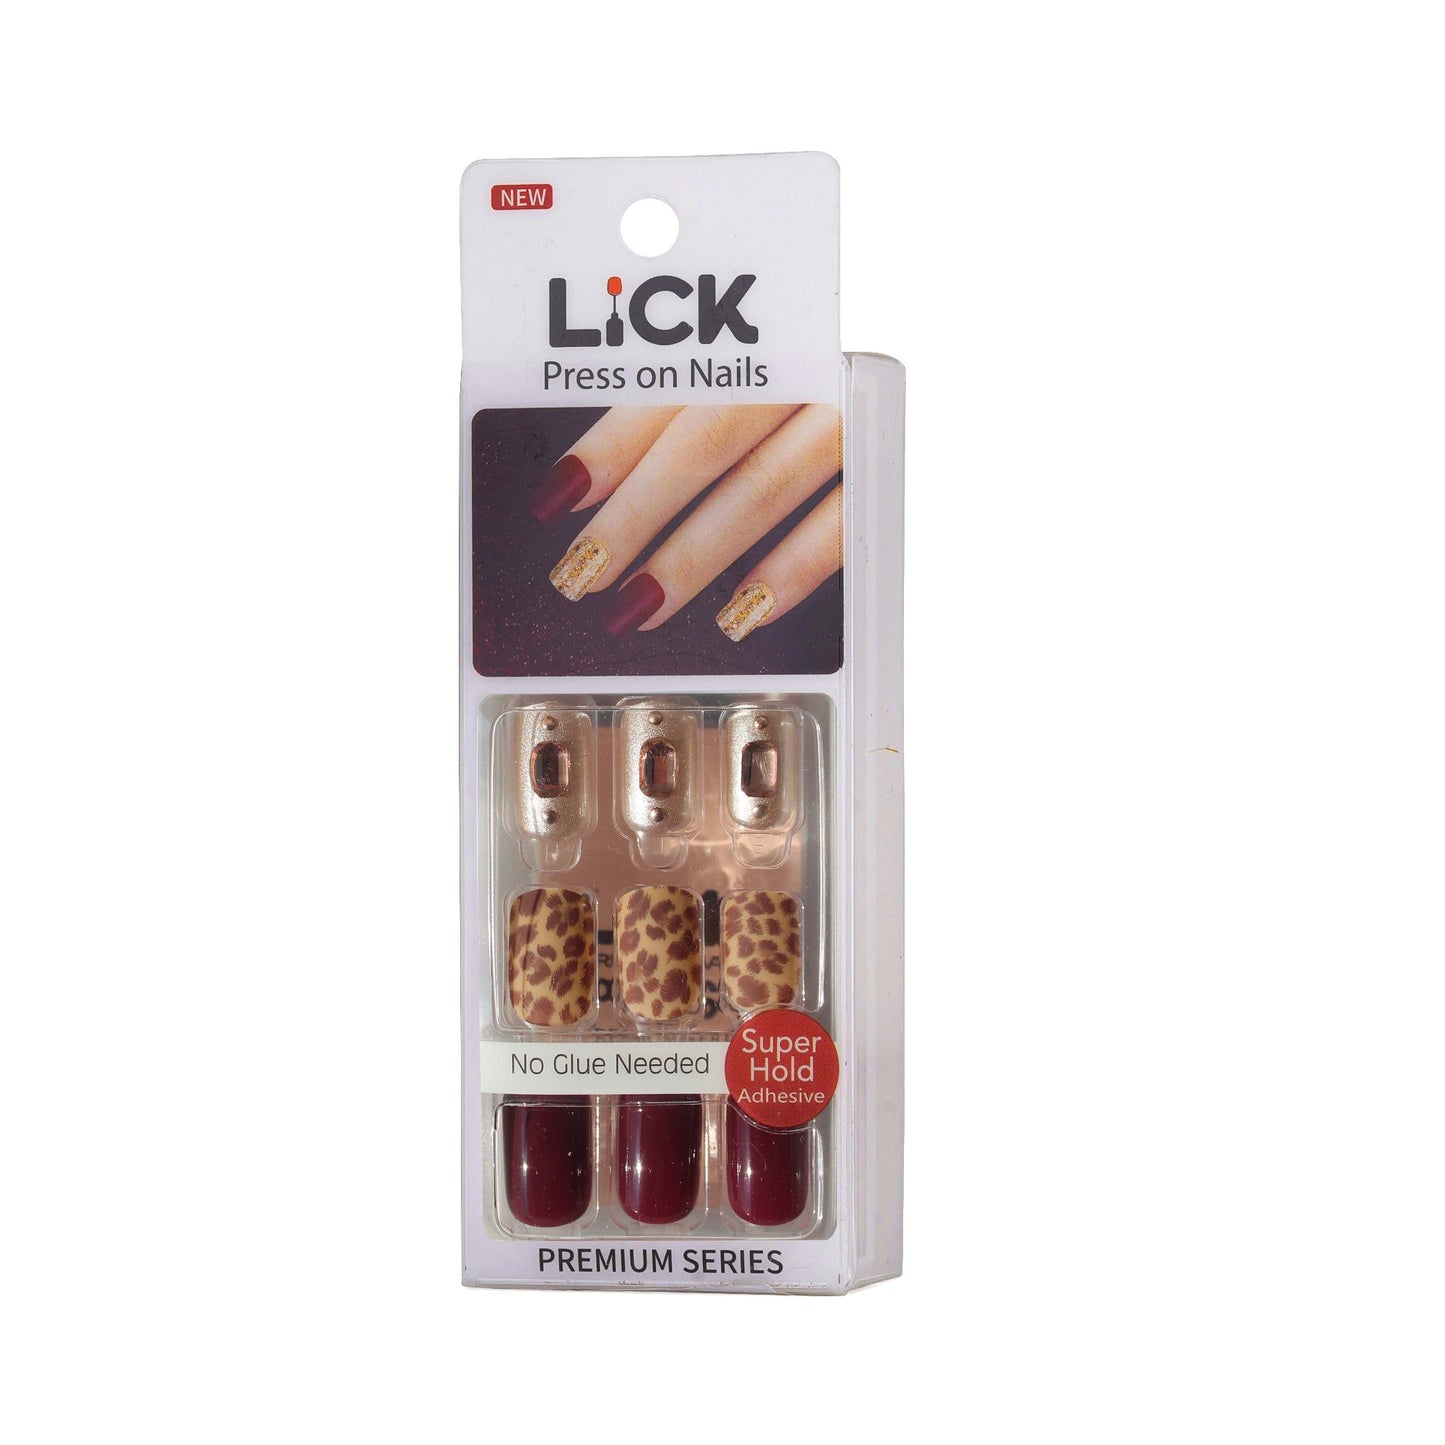 LICK NAILS Deep Wine With stud Design Press on Nails